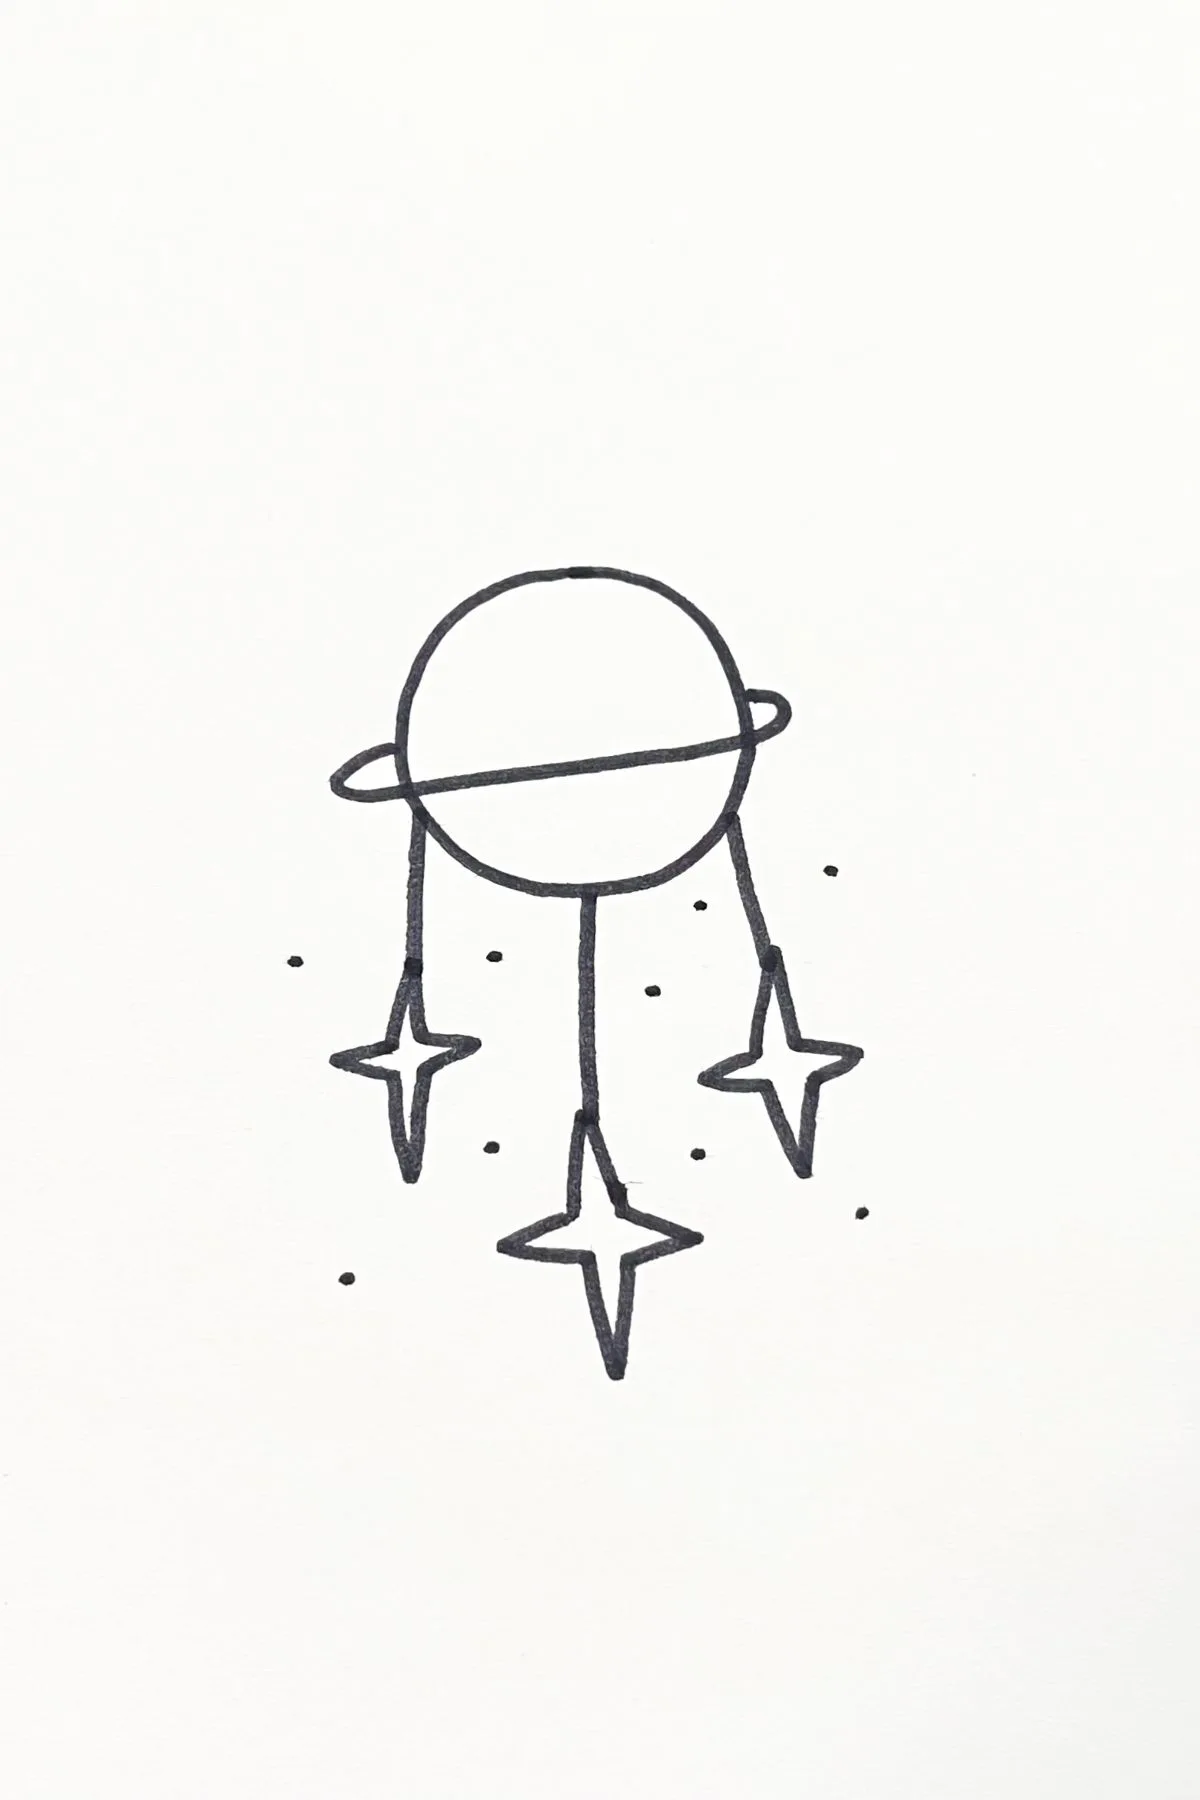 planet with hanging stars drawing idea